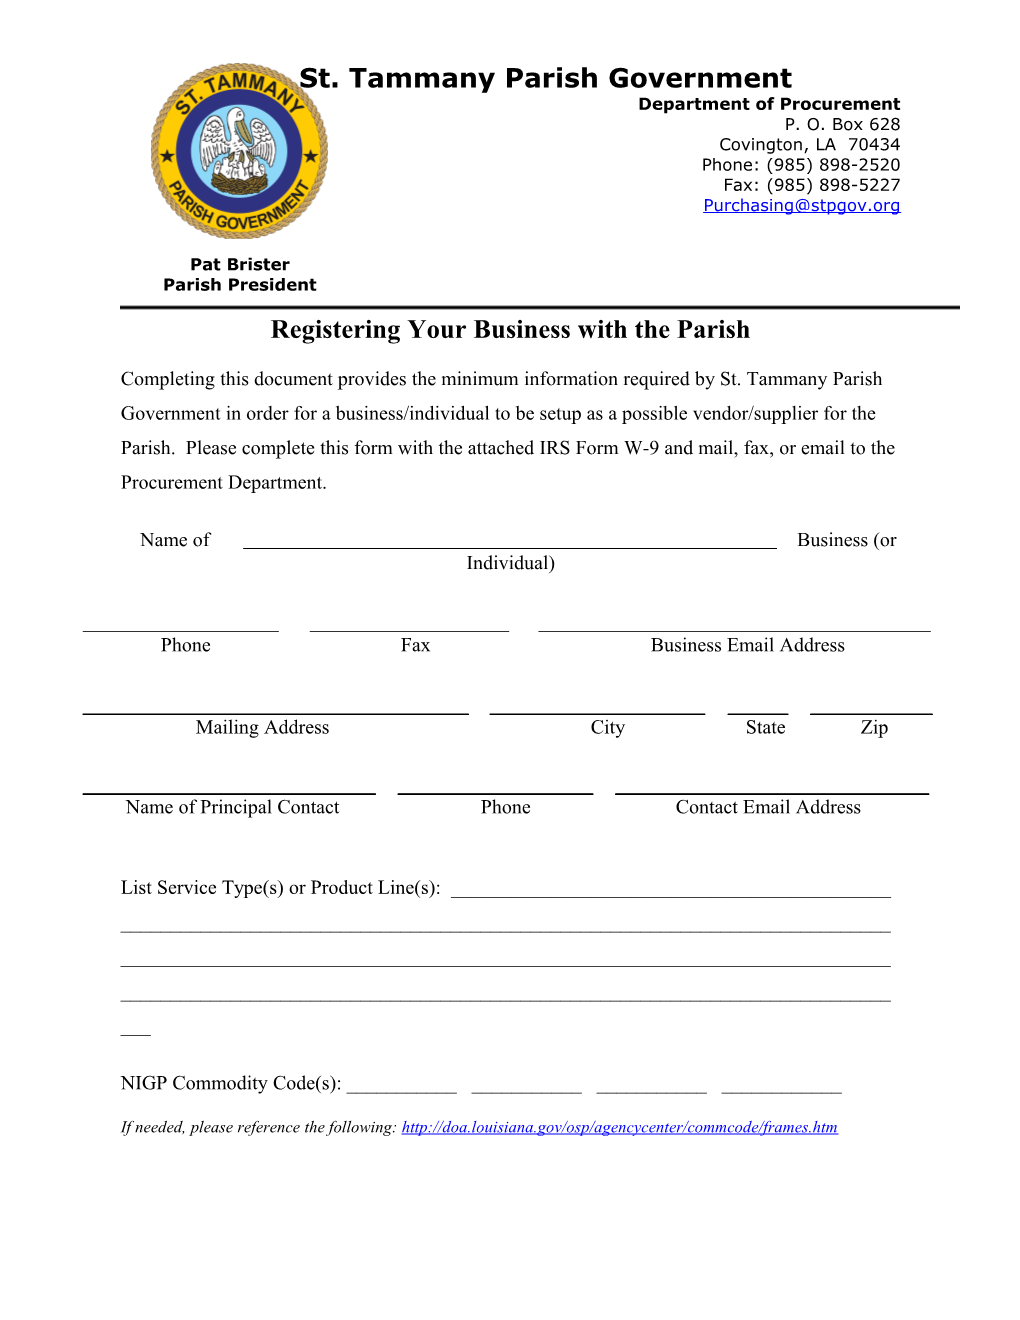 Registering Your Business with the Parish